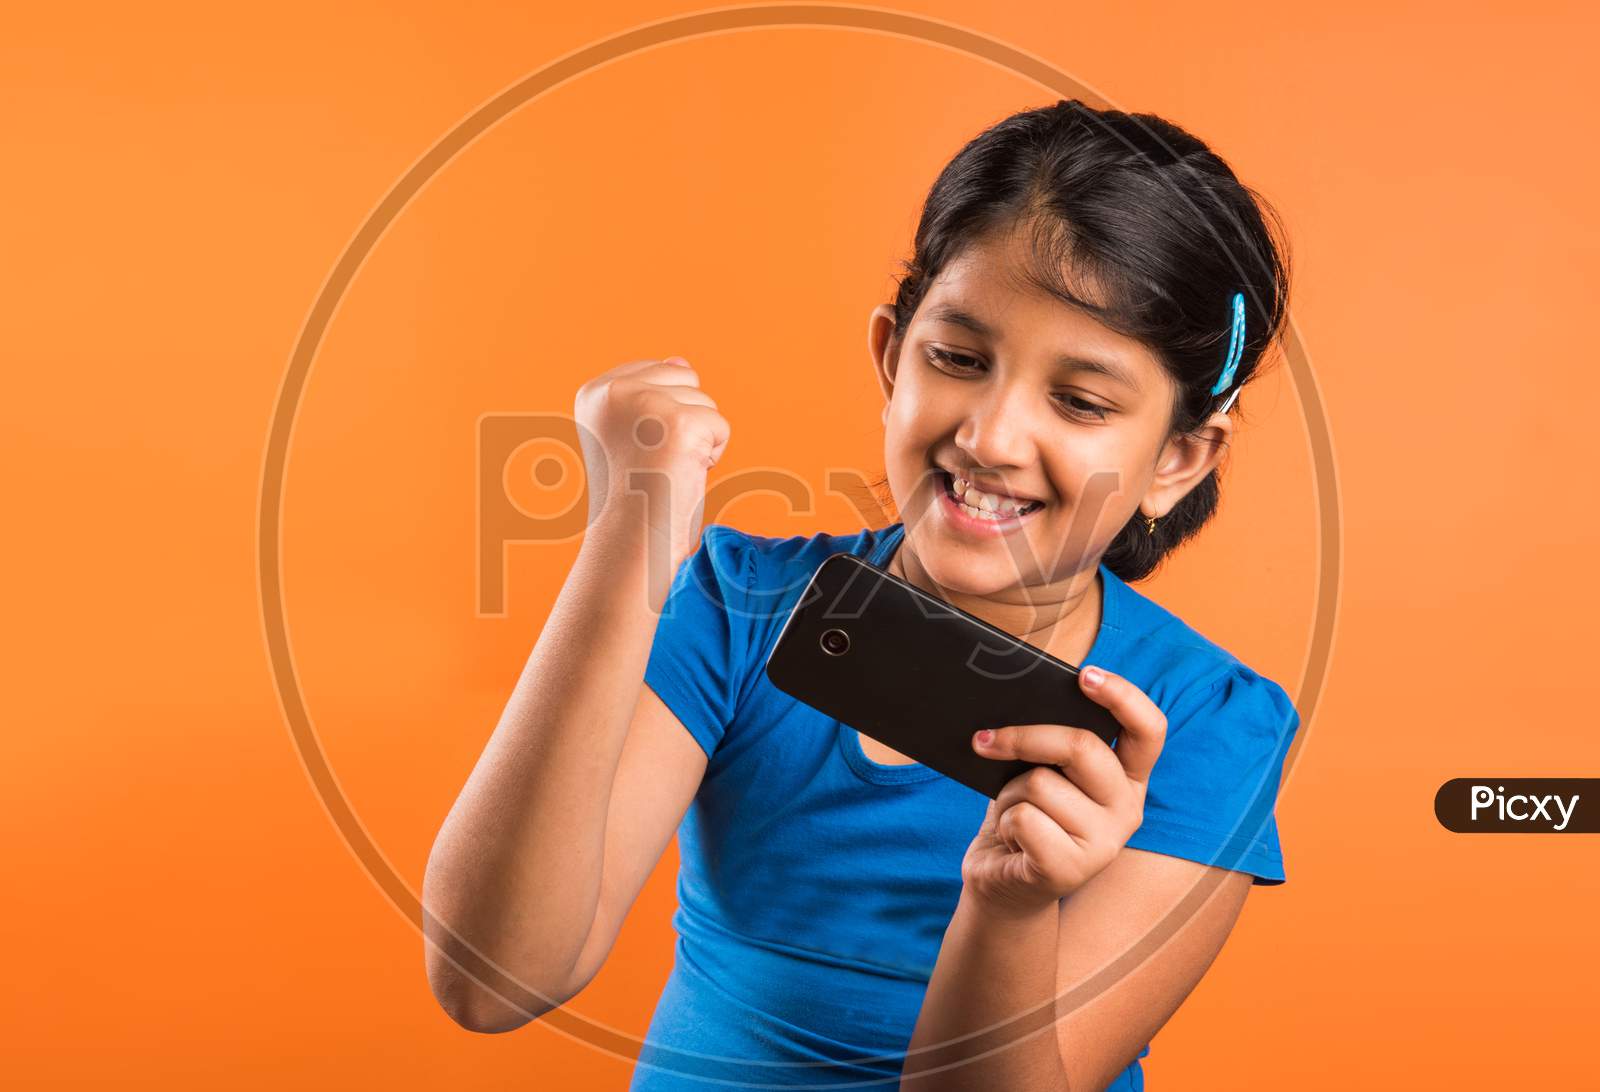 Small Girl using smartphone for playing game or taking selfie picture